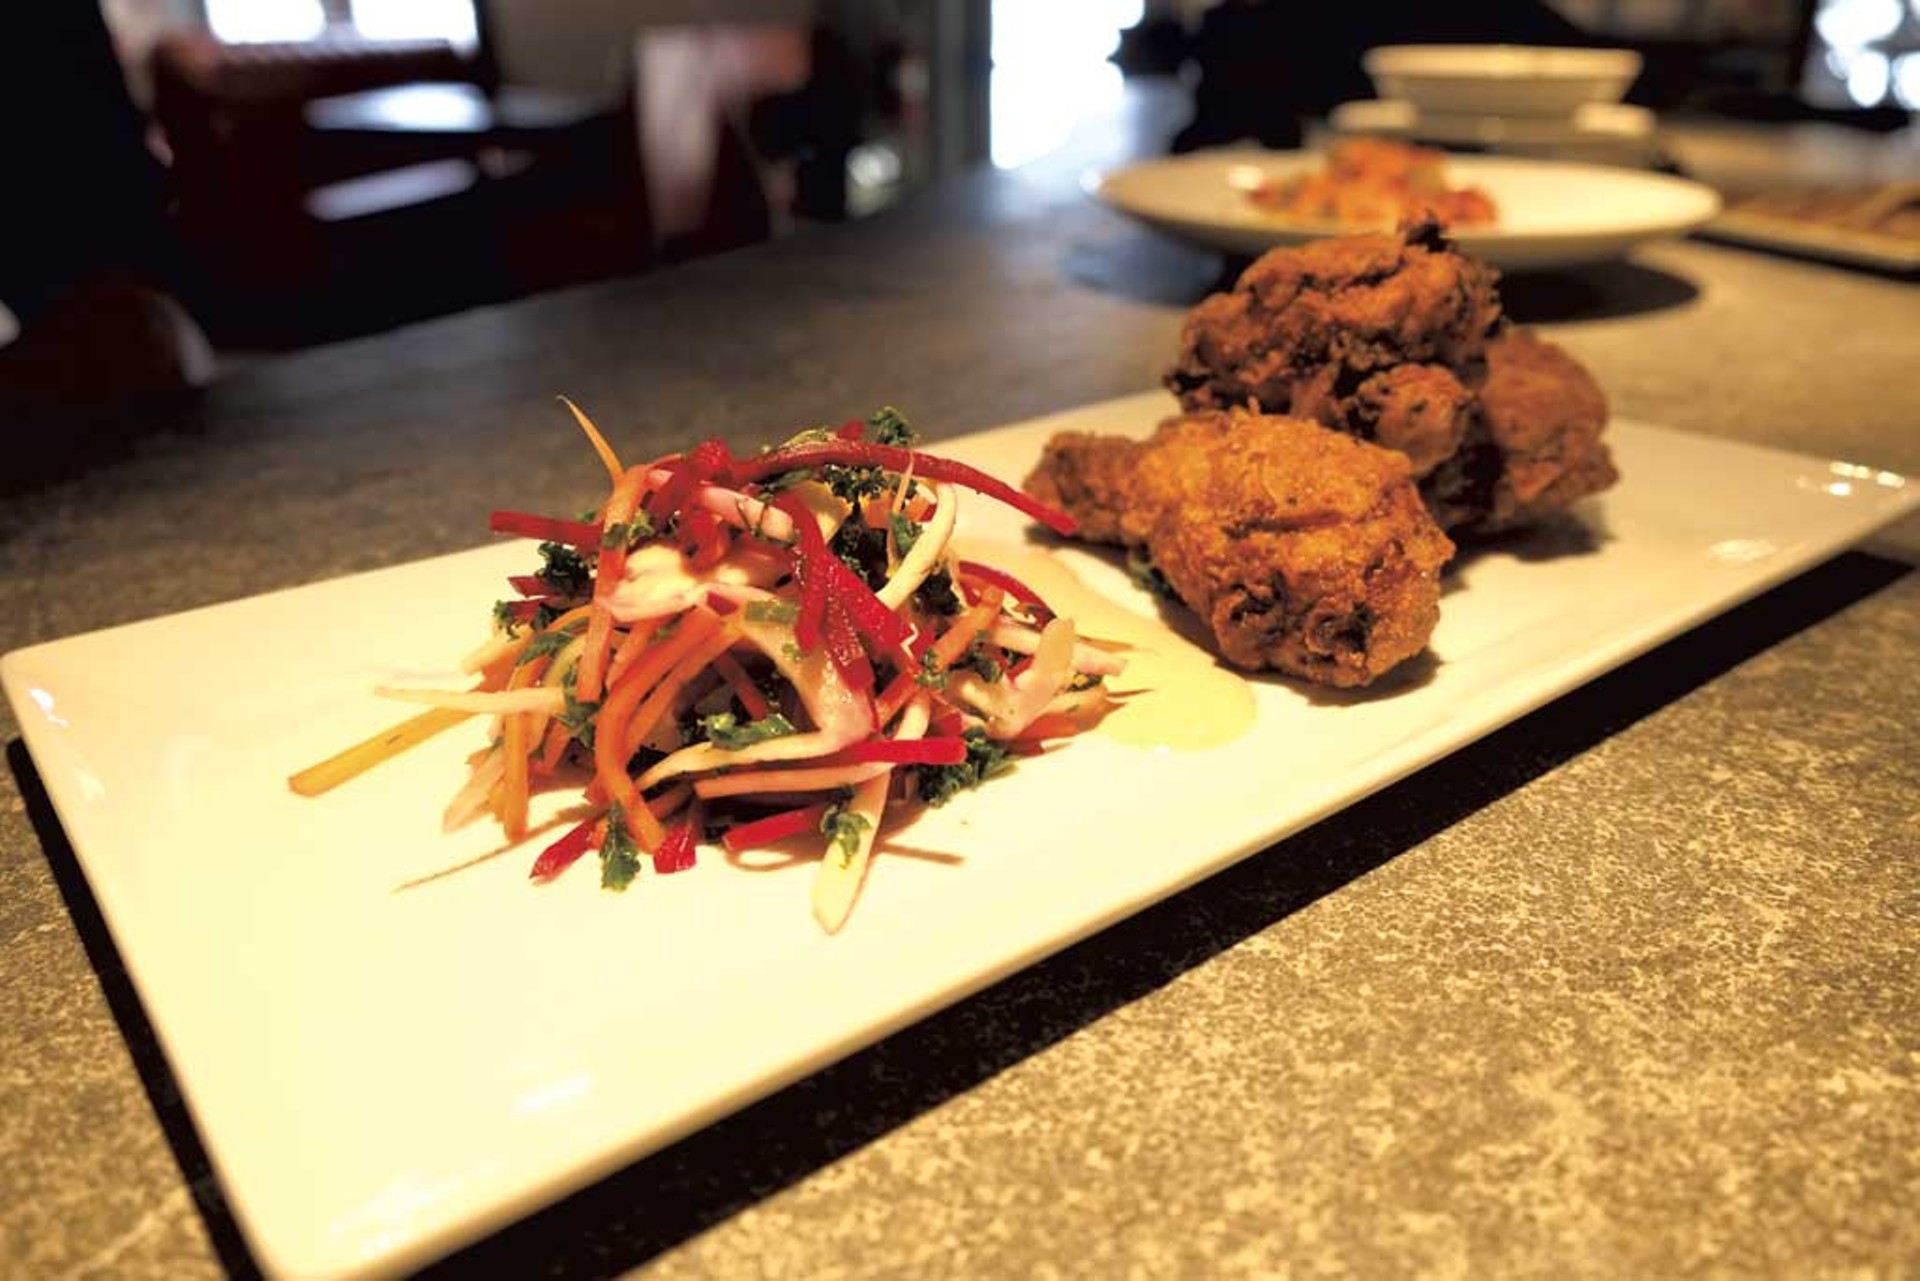 Fried chicken and root vegetable slaw